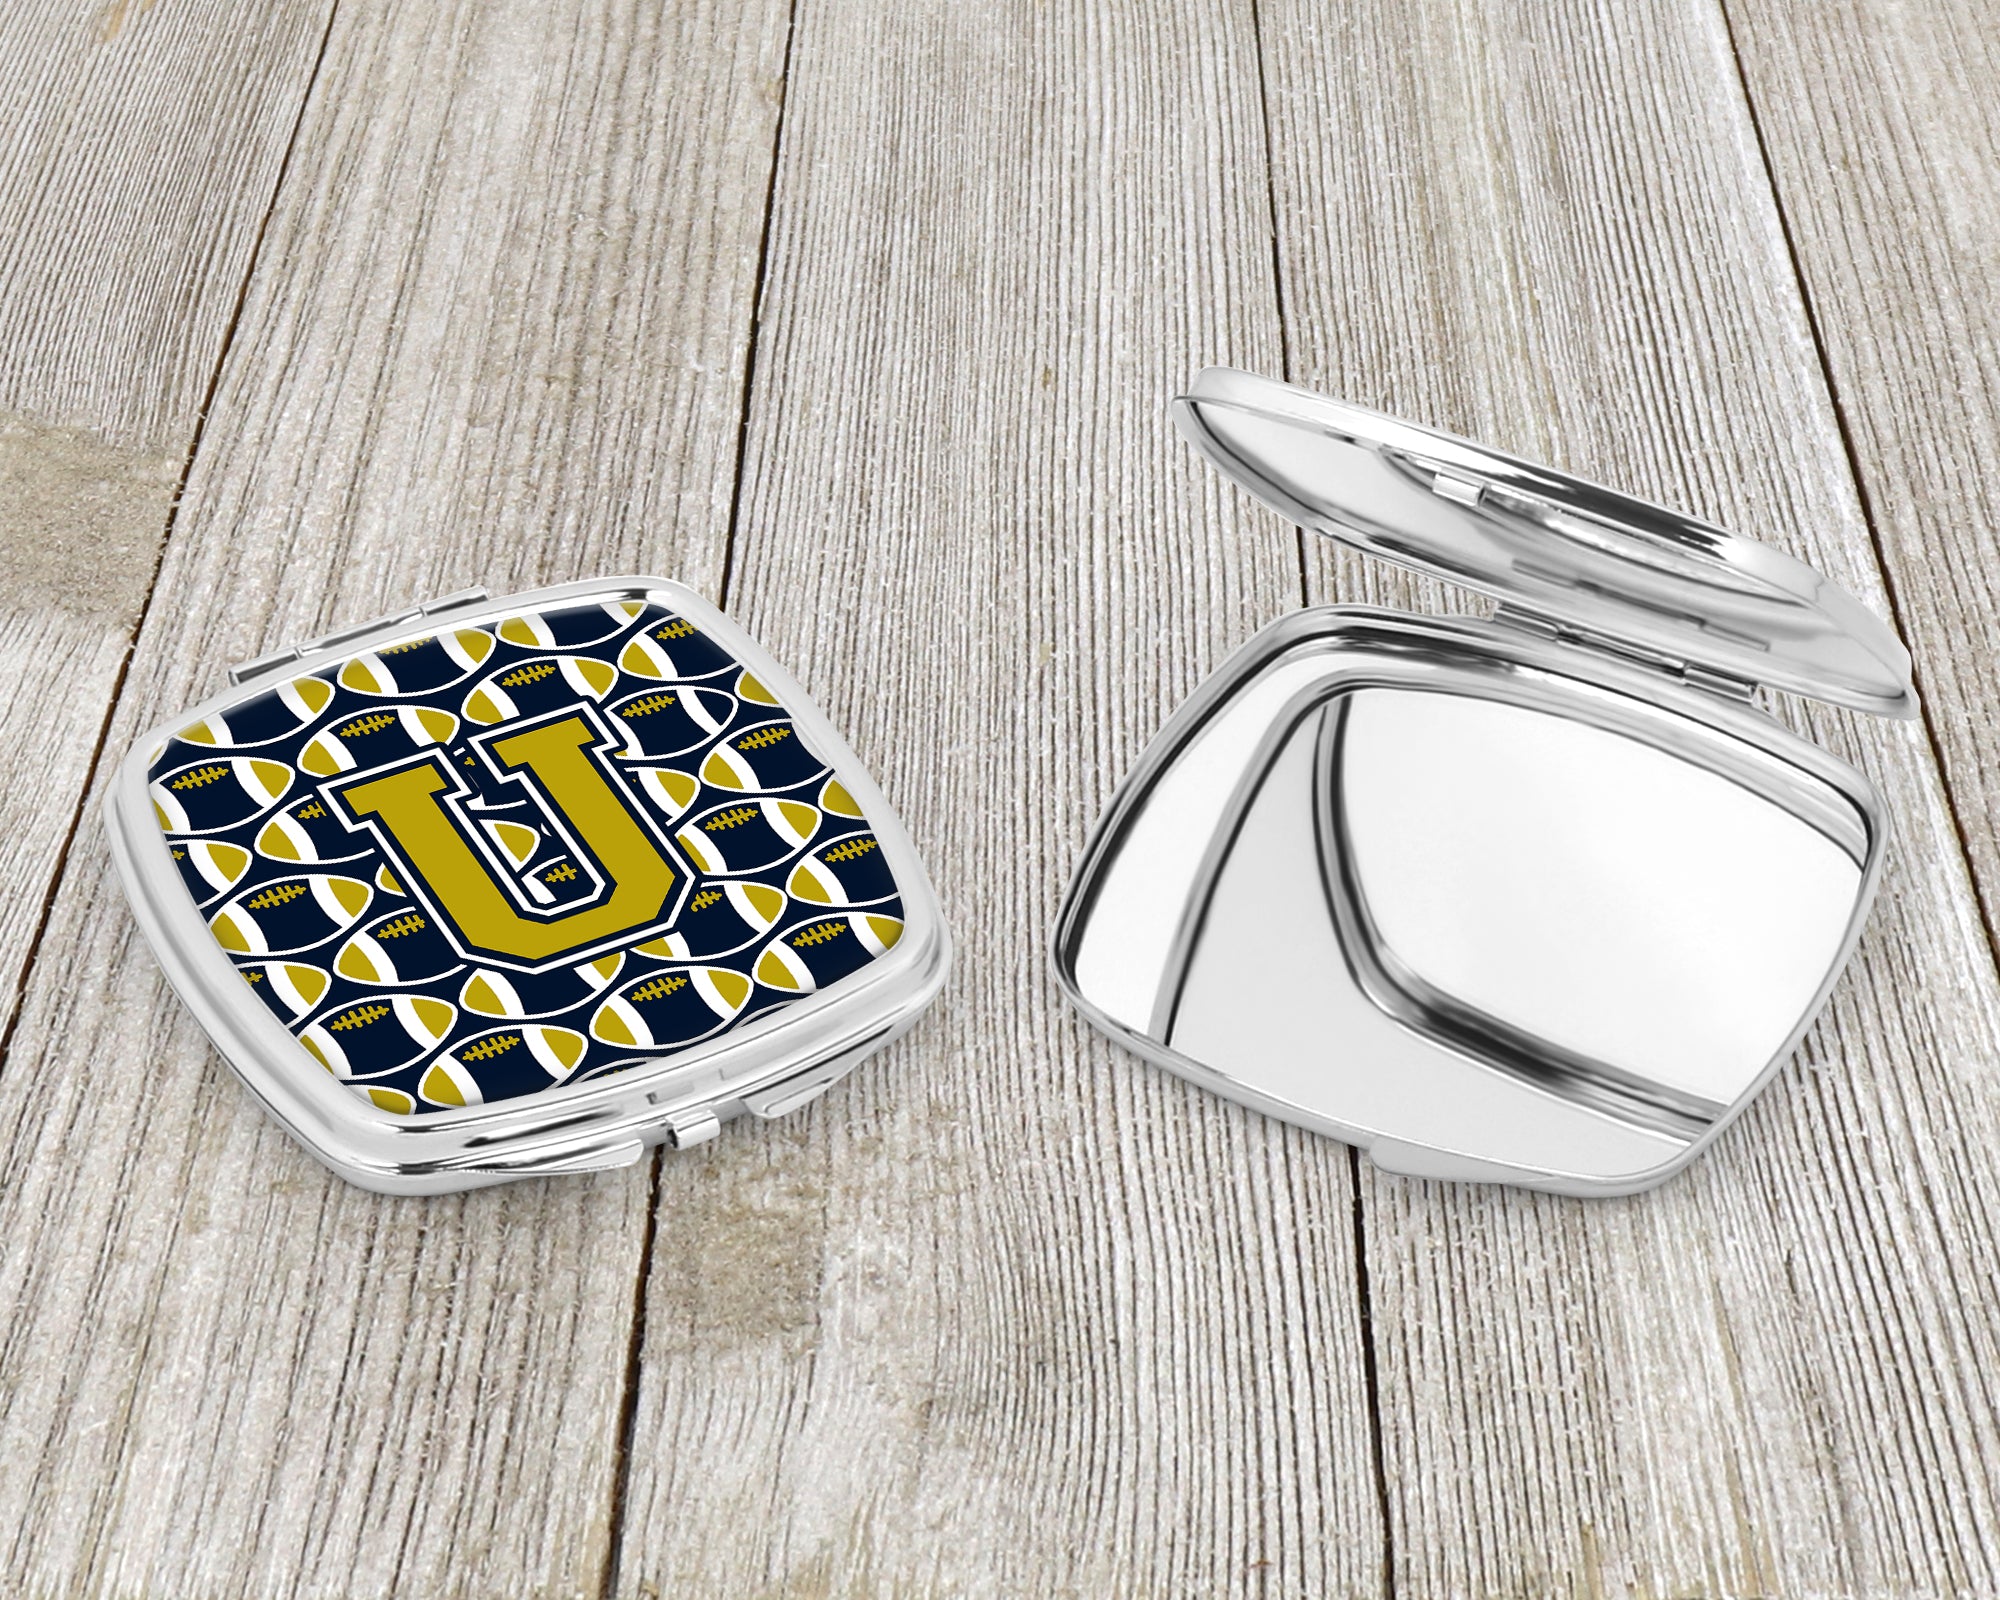 Letter U Football Blue and Gold Compact Mirror CJ1074-USCM